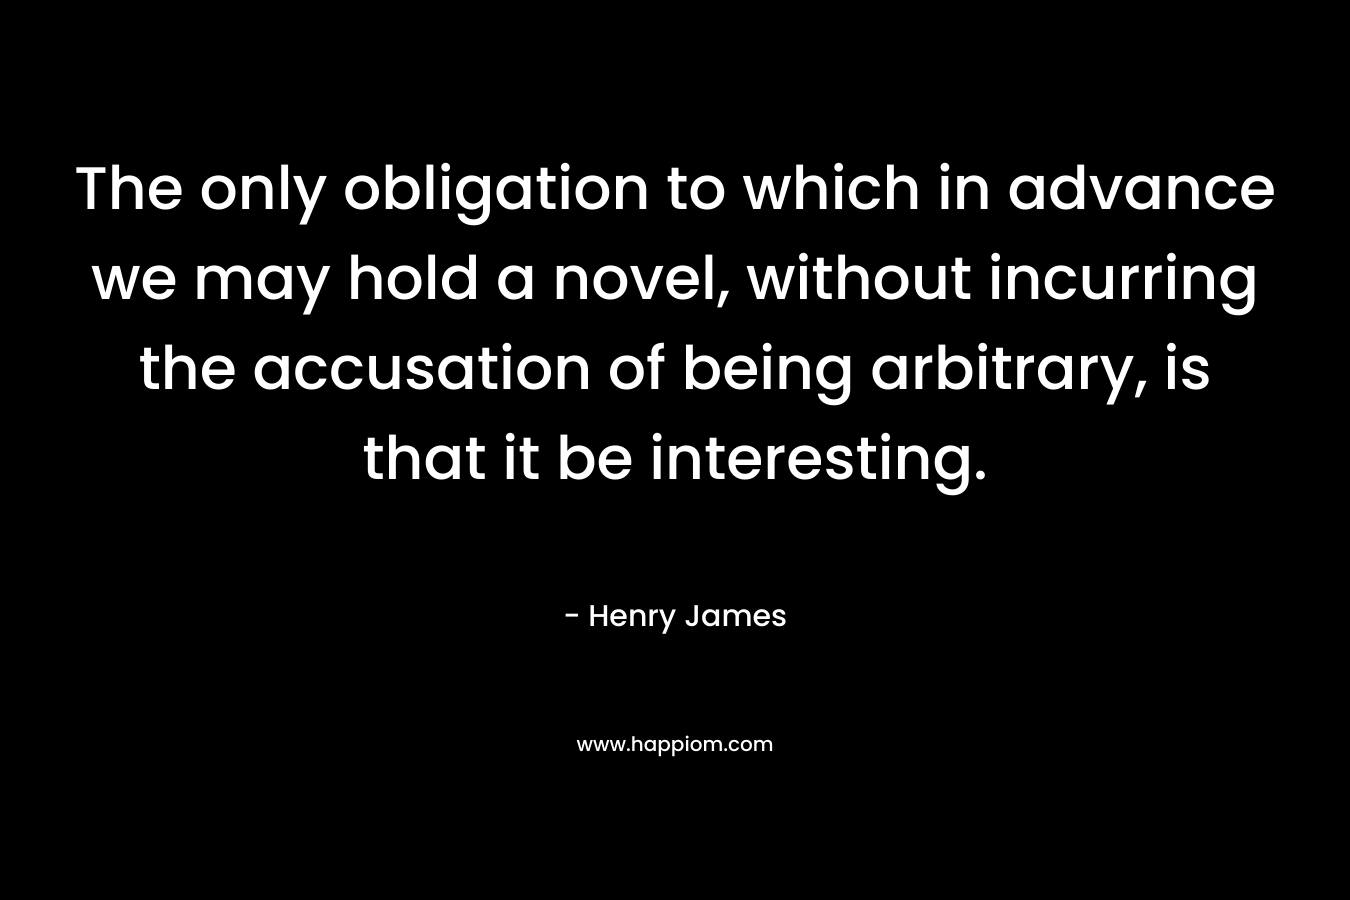 The only obligation to which in advance we may hold a novel, without incurring the accusation of being arbitrary, is that it be interesting. – Henry James